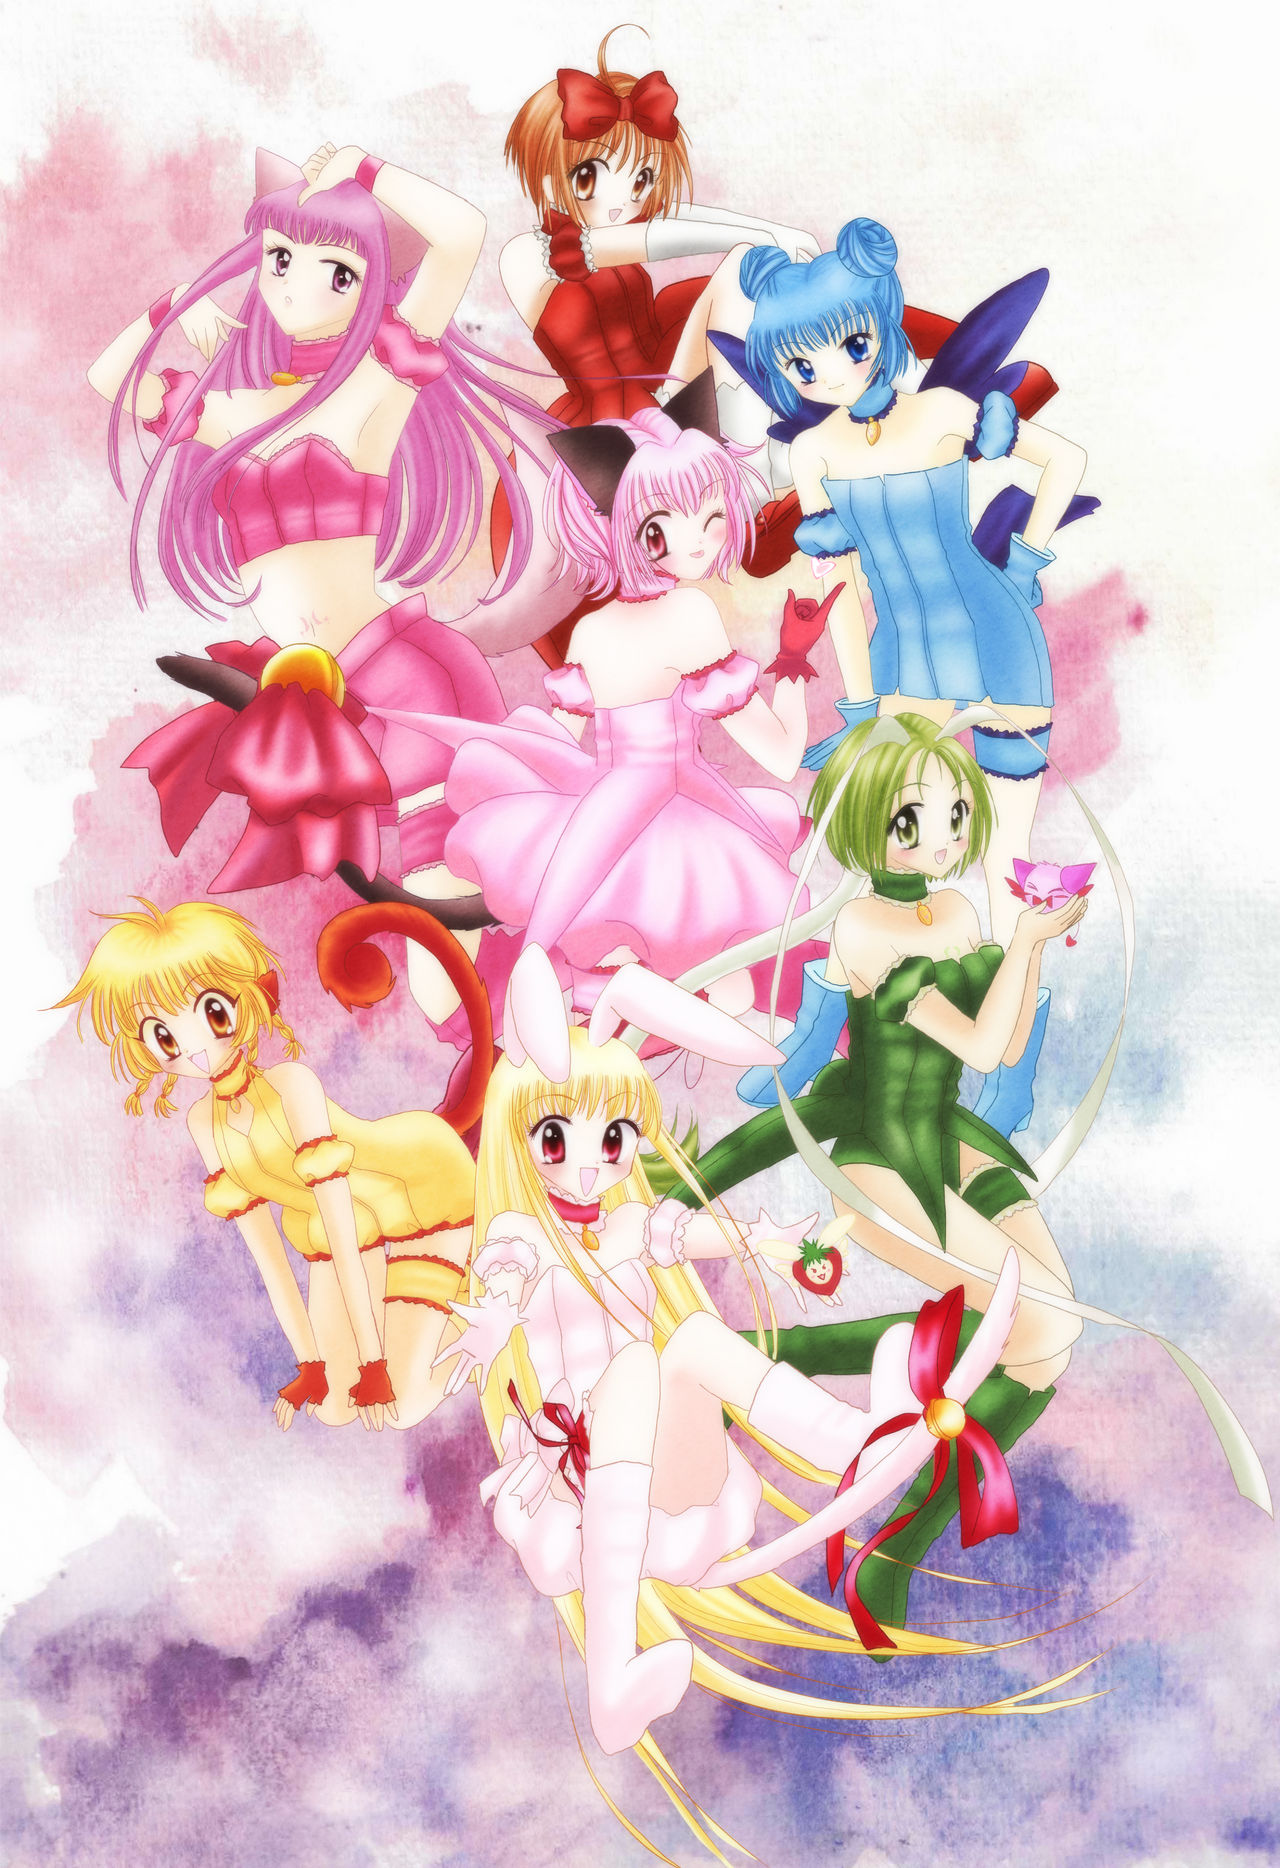 Tokyo Mew Mew New - Cover 2 by Colourthief on DeviantArt